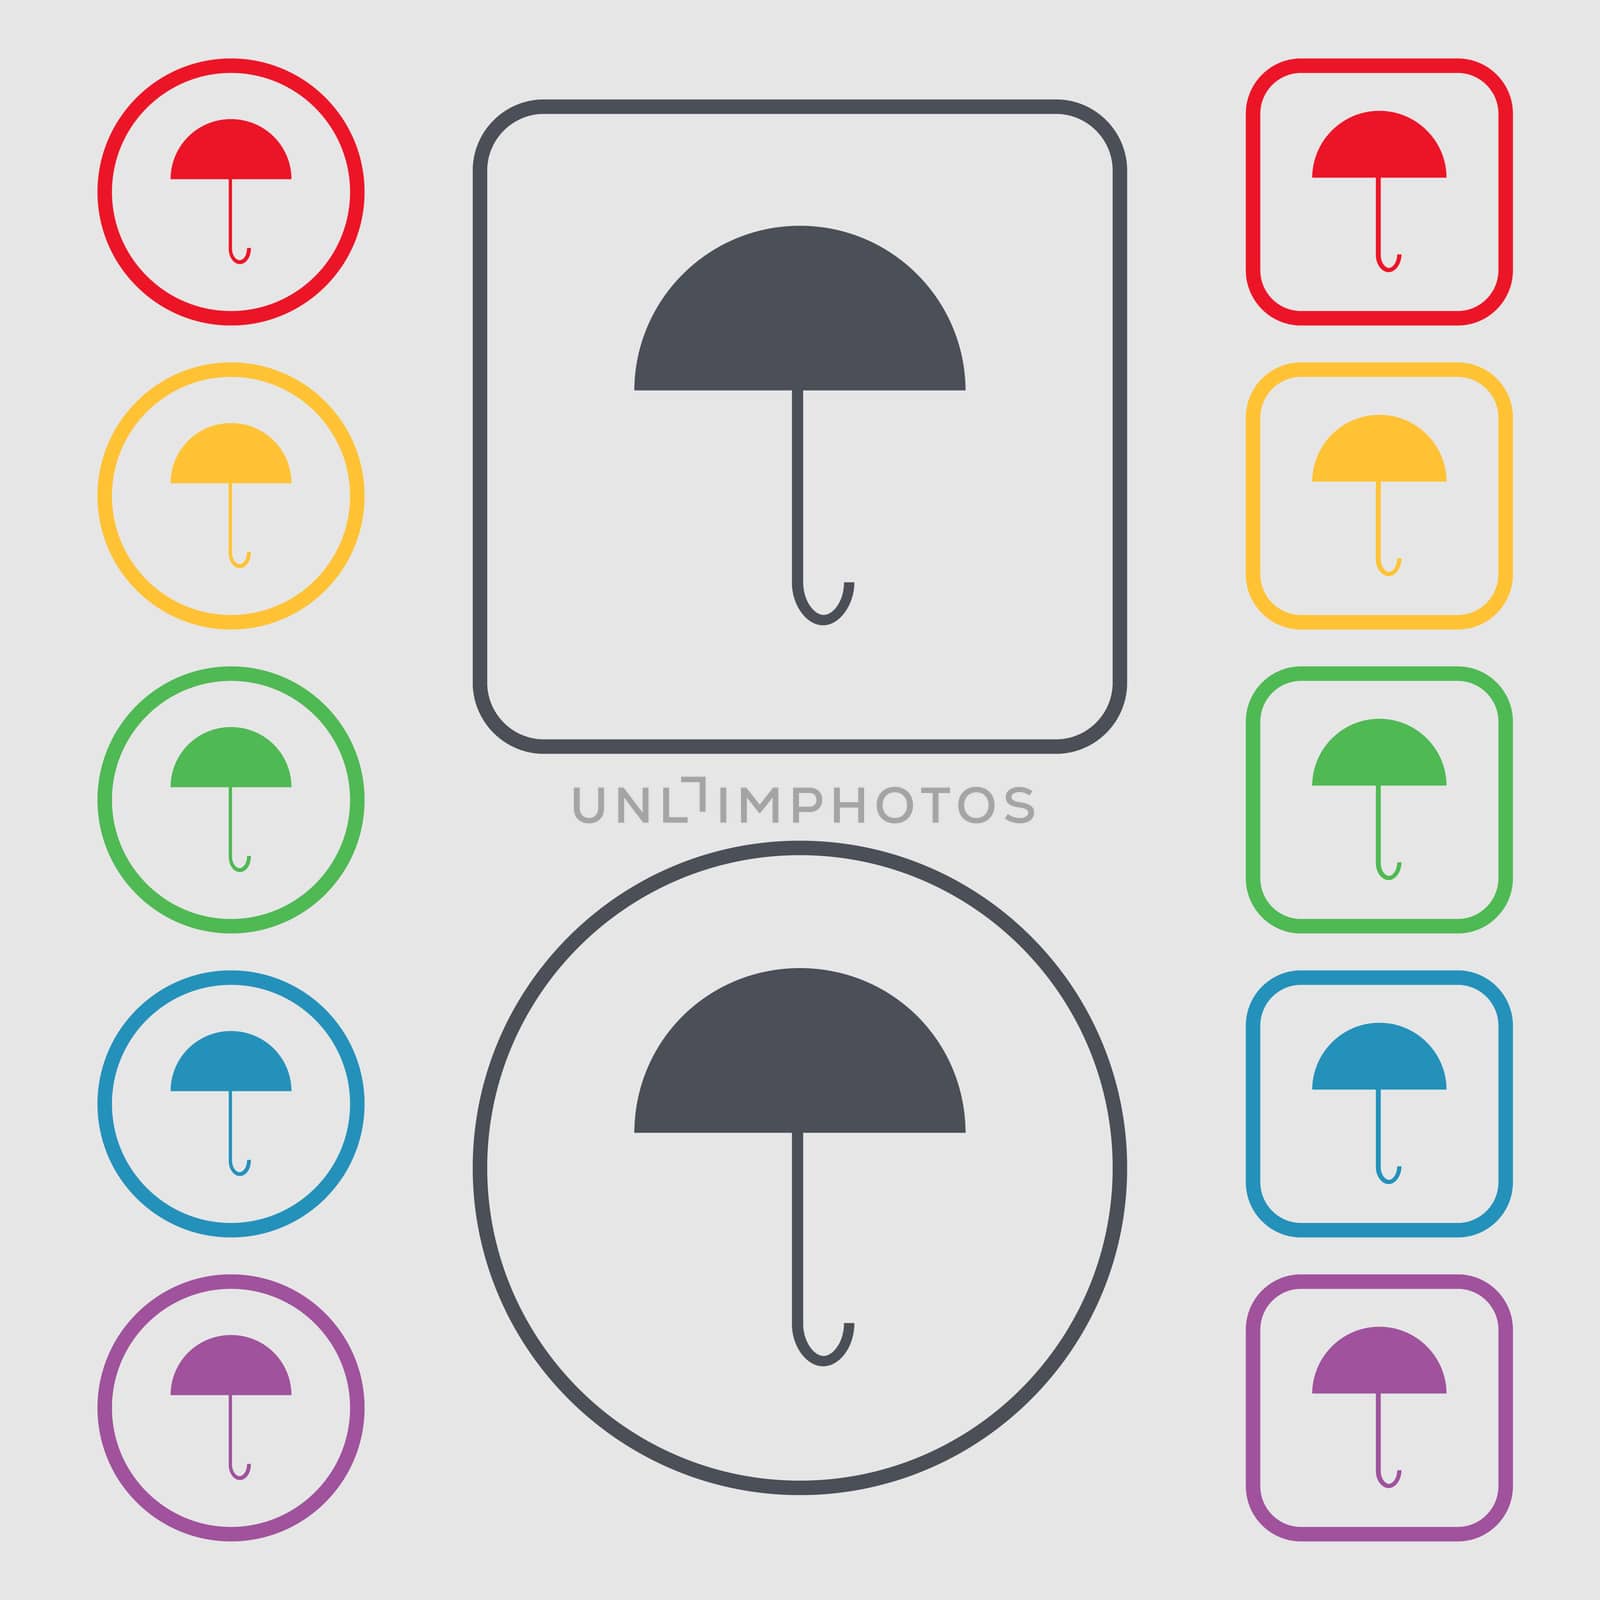 Umbrella sign icon. Rain protection symbol. Symbols on the Round and square buttons with frame. illustration